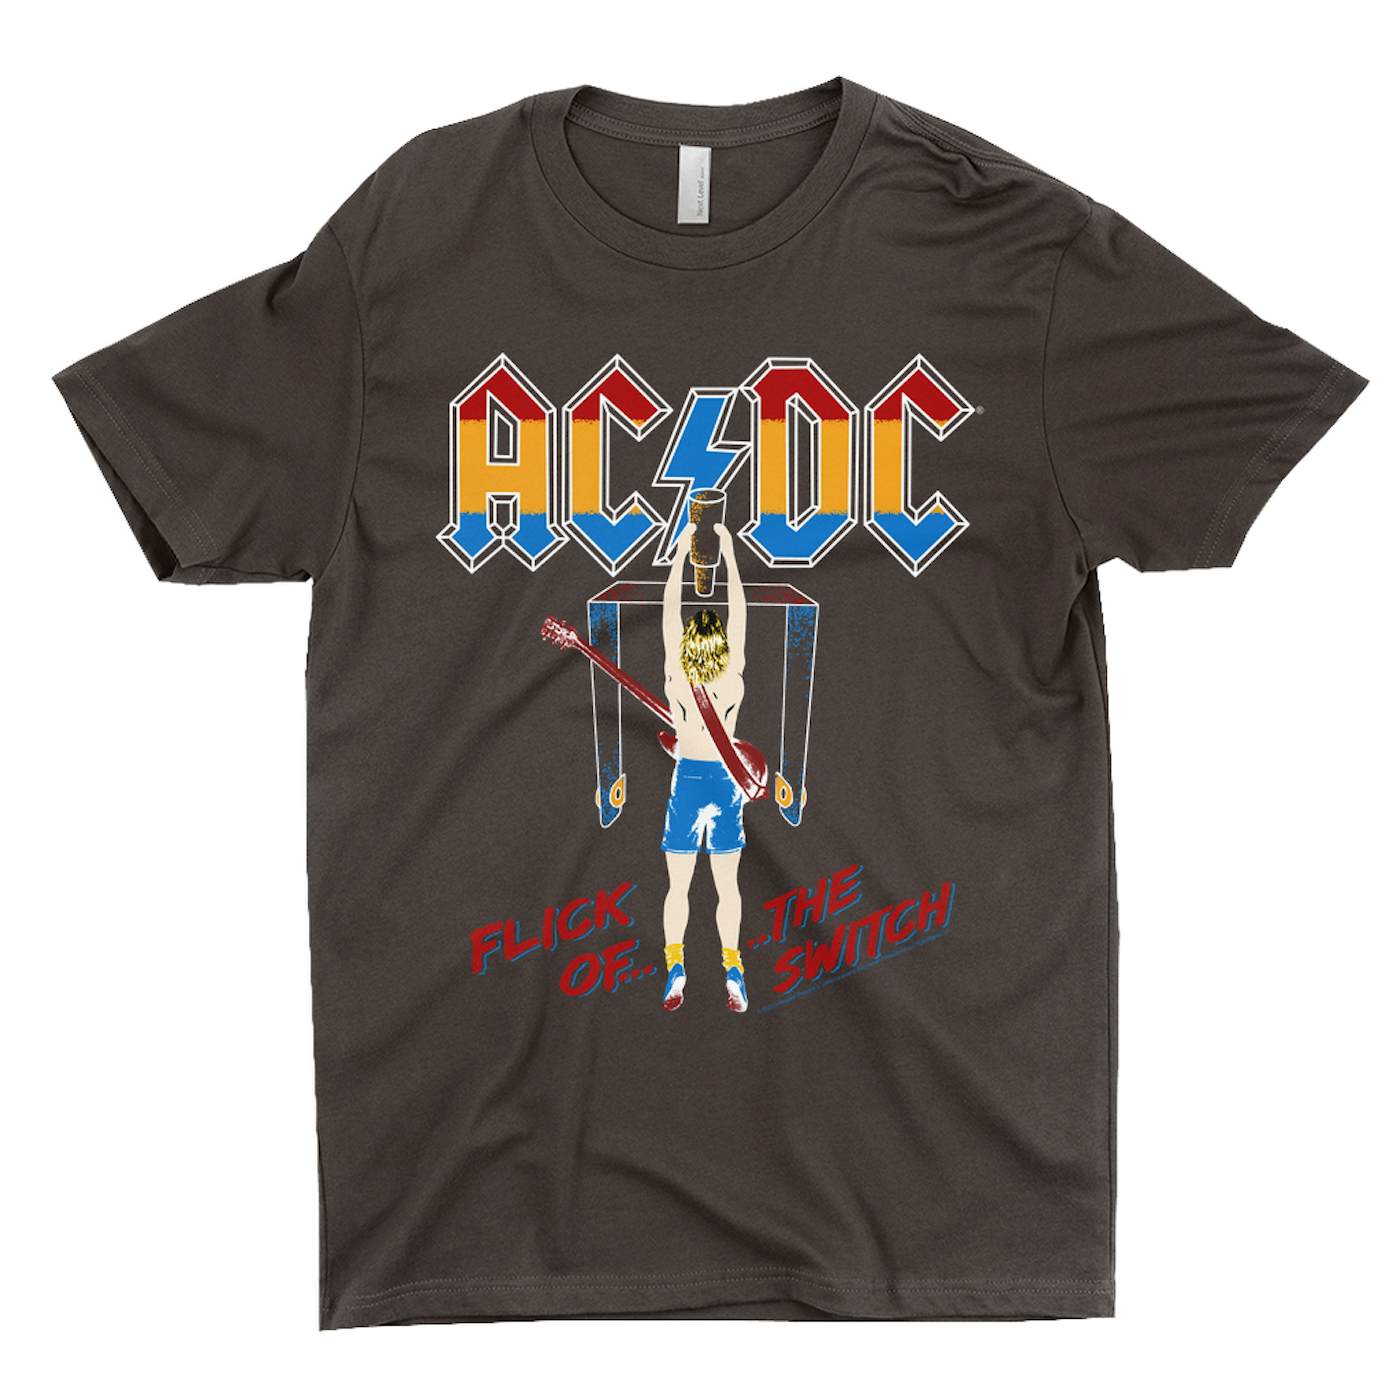 AC/DC T-Shirt | Colorful Flick Of The Switch ACDC Shirt (Merchbar Exclusive)